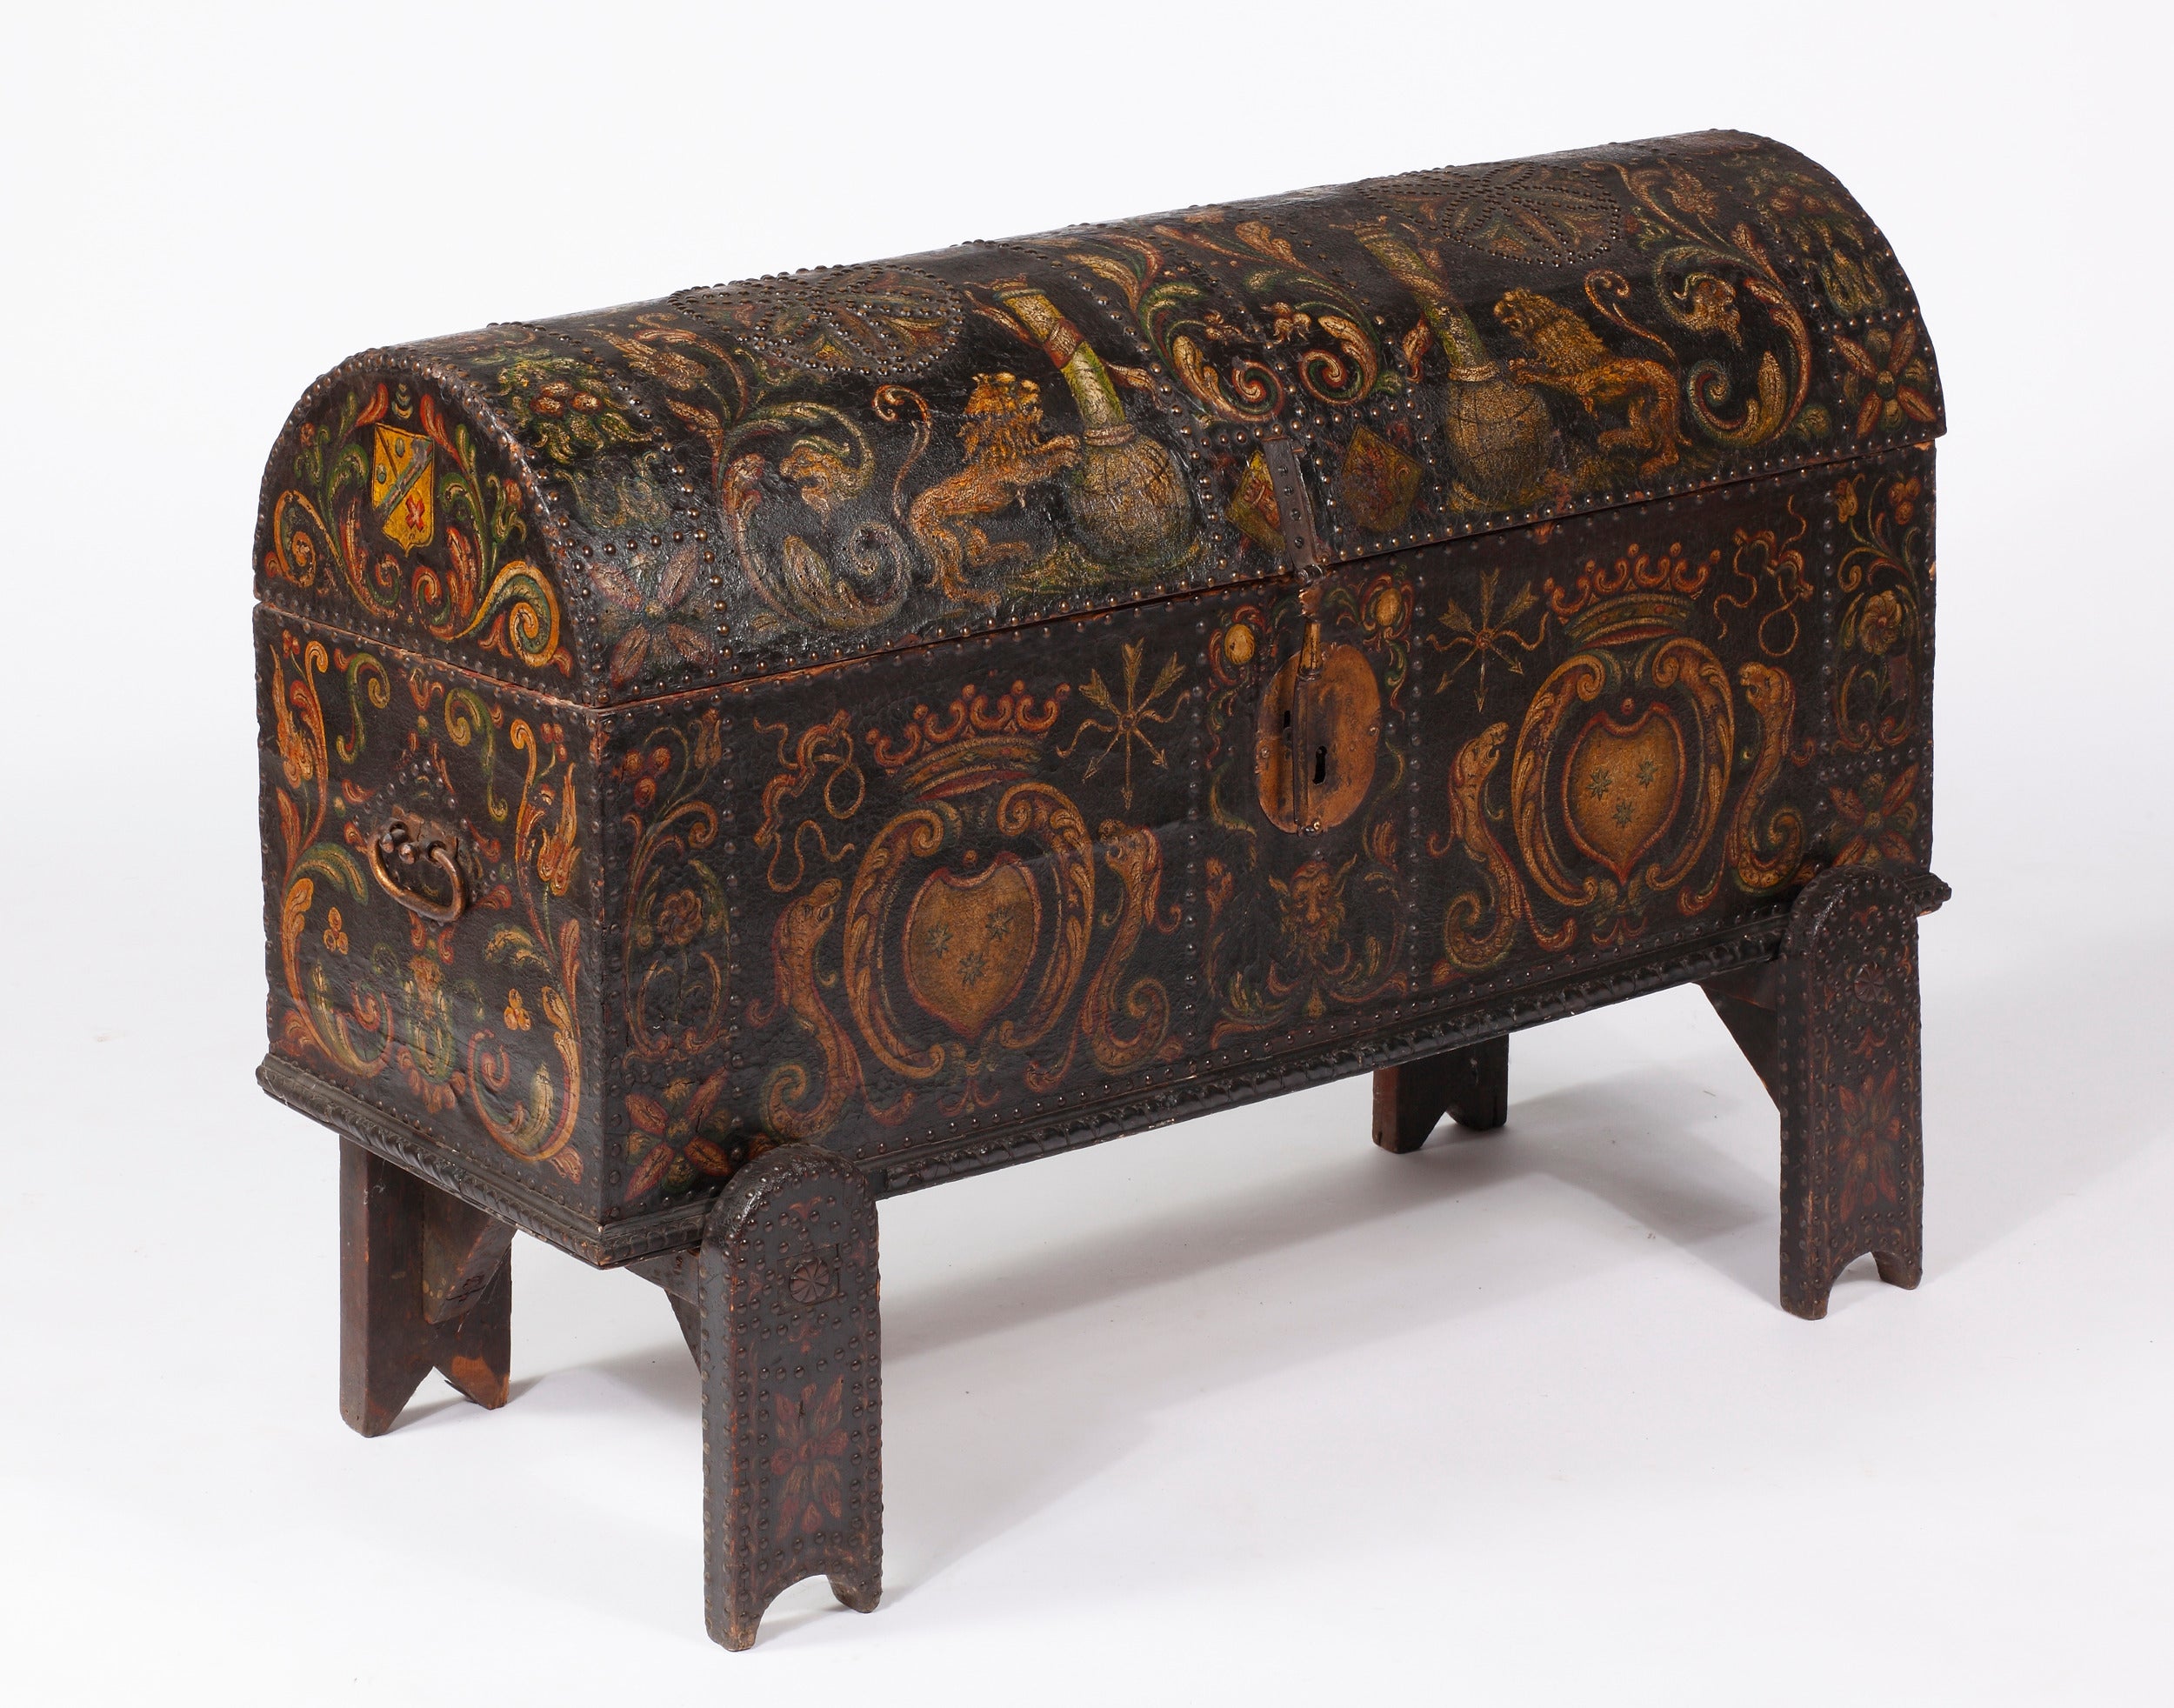  Early English Dome Trunk with painted leather & brass mounted, on stand 18thC 